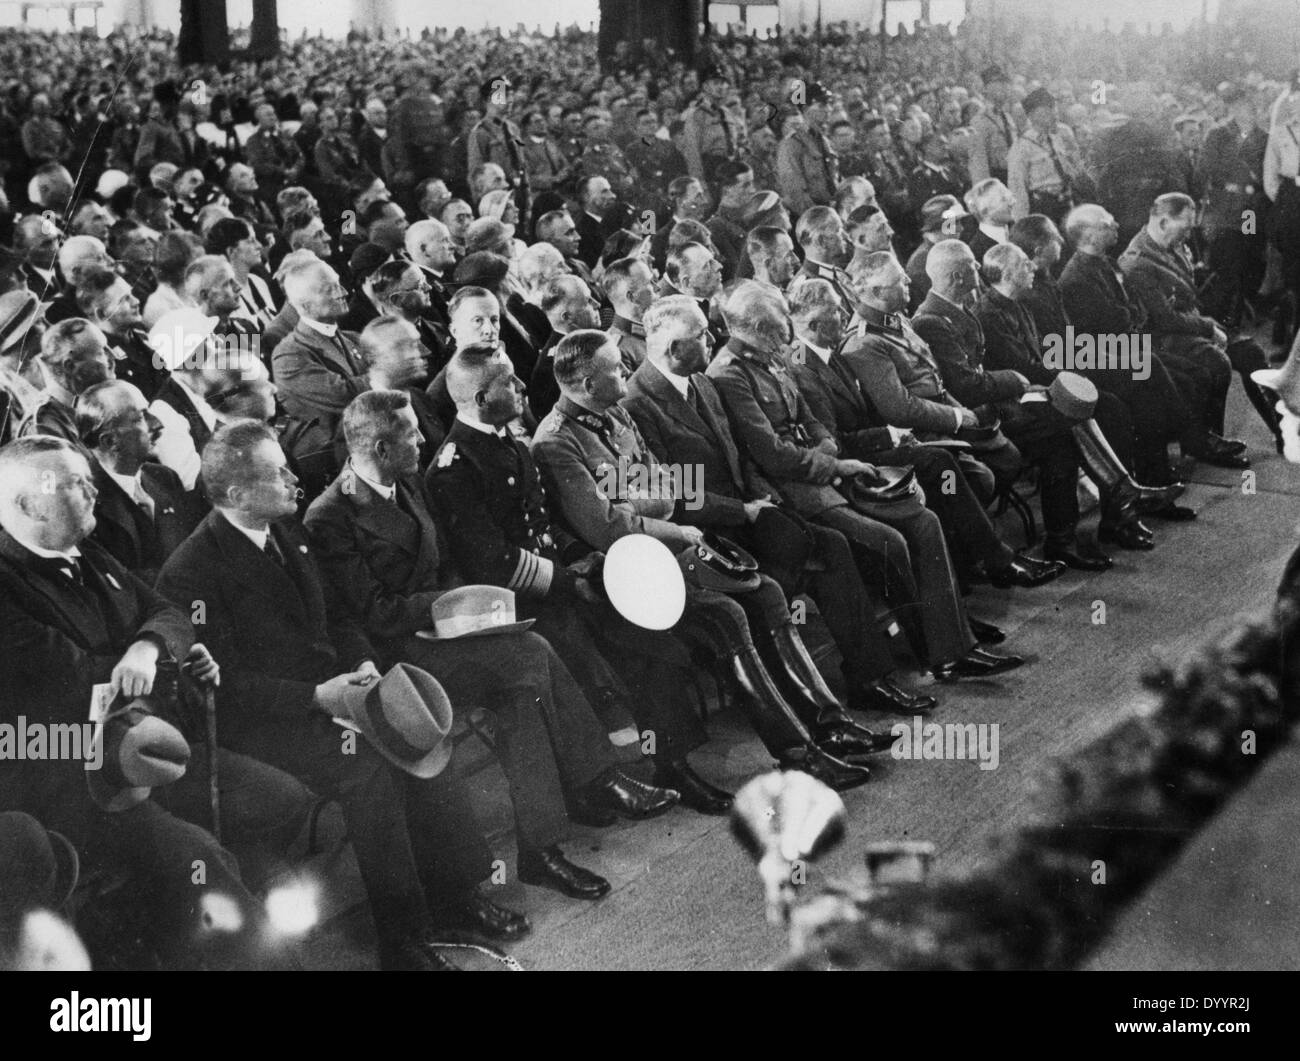 High-ranked NSDAP members a the opening of the party ralley in Nuremberg, 1933 Stock Photo